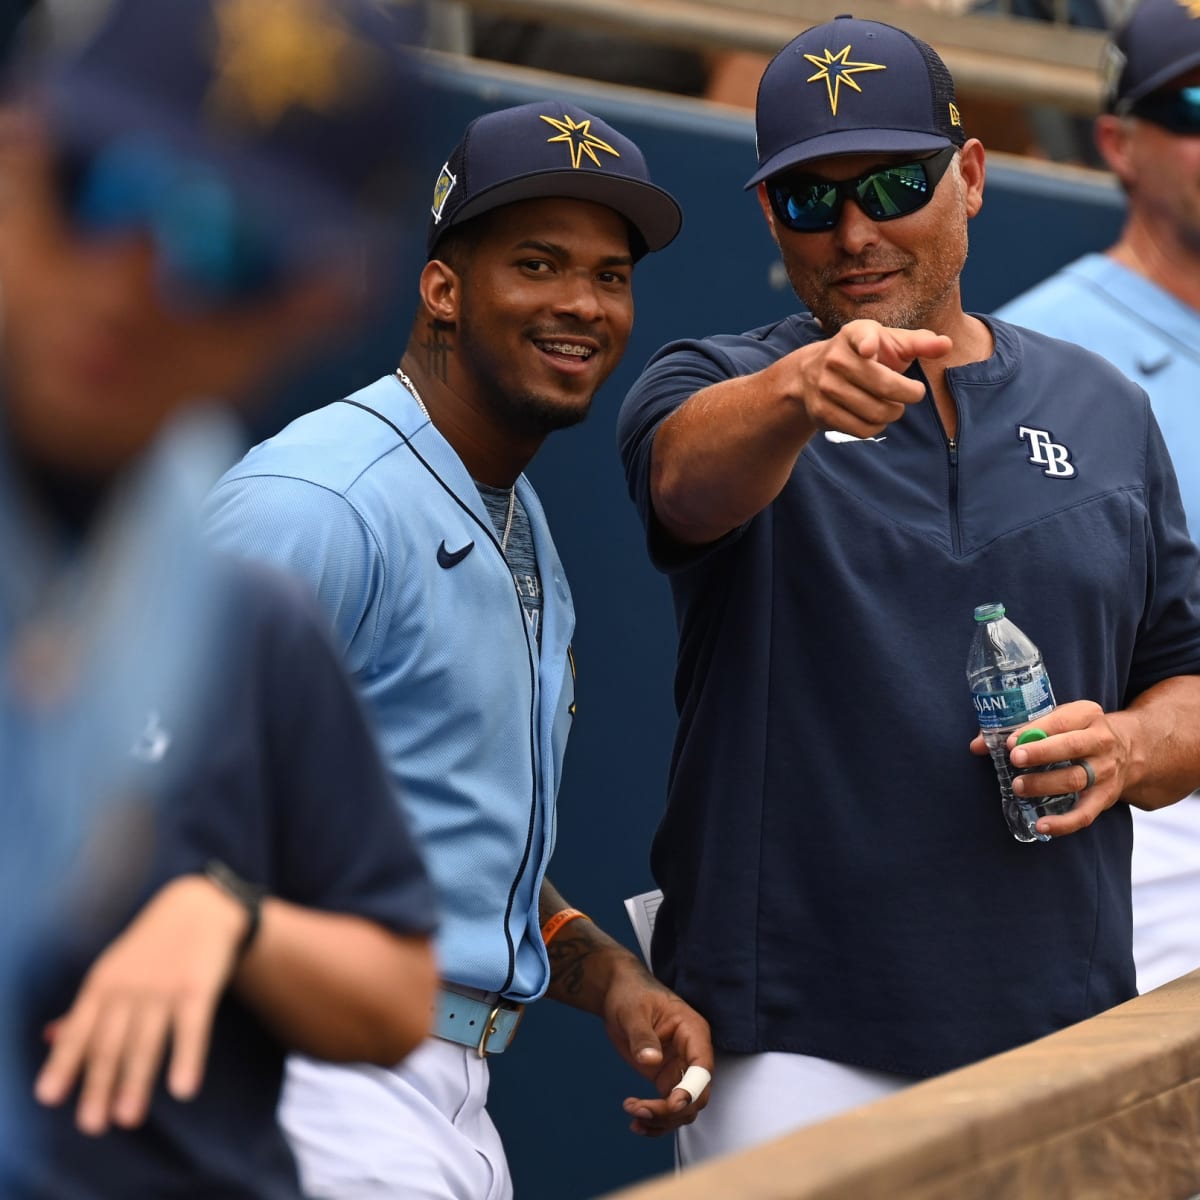 Tampa Bay Rays spring training game eleven lineups against the New